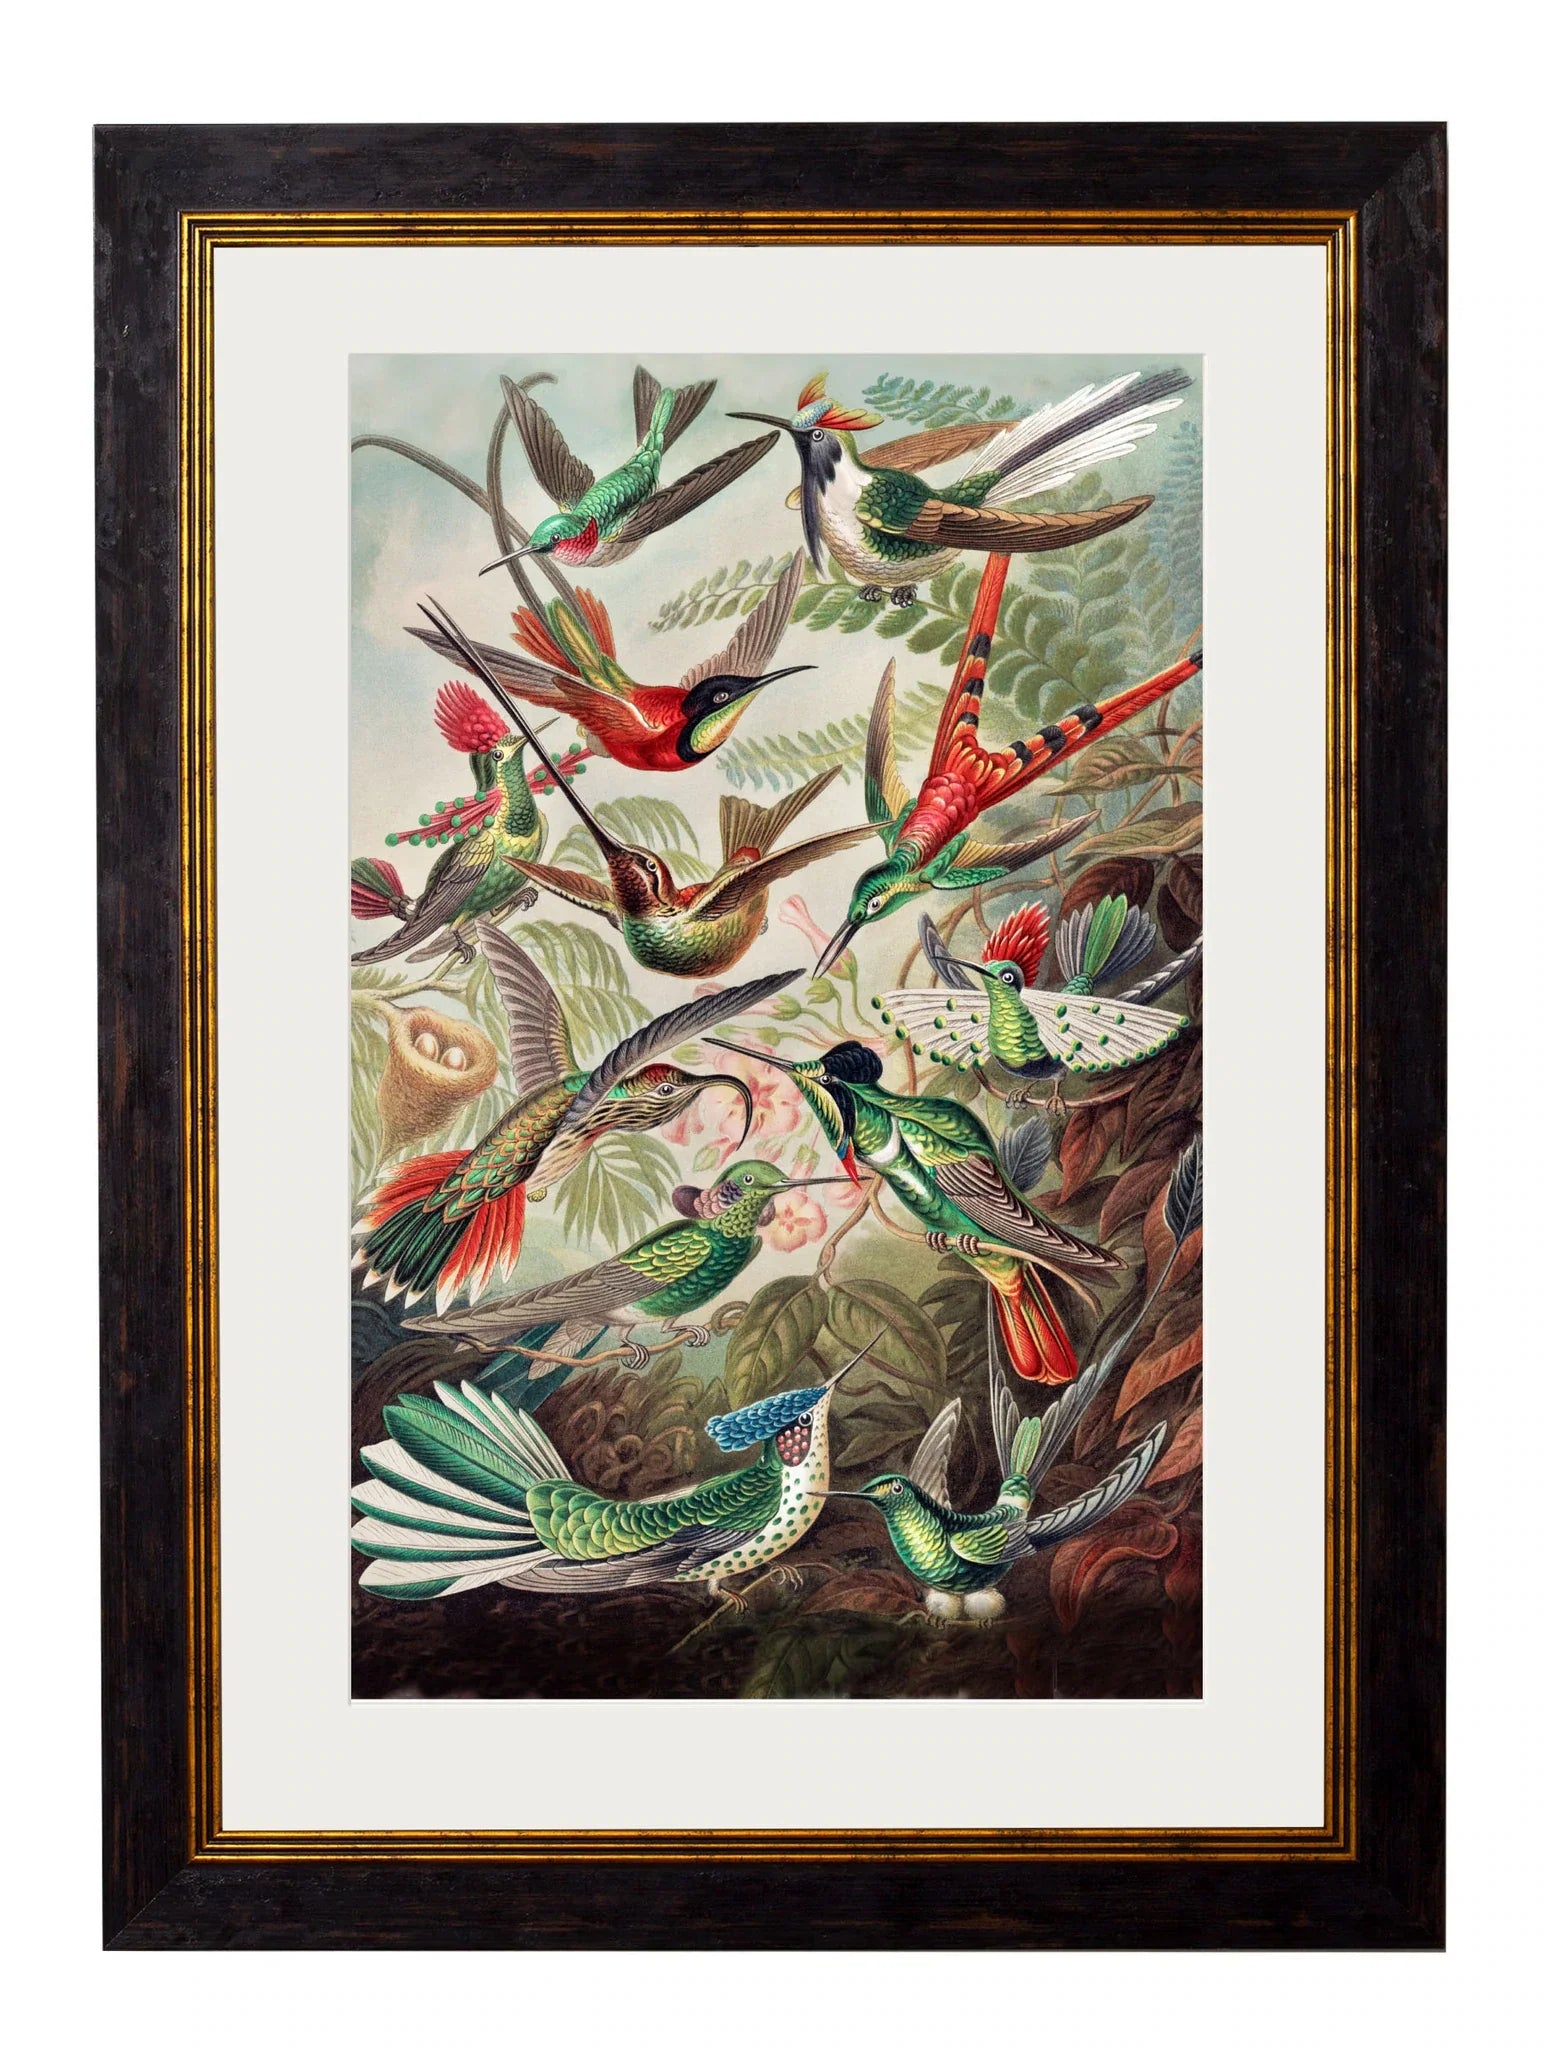 C.1904 Haeckel Hummingbirds' Frame for sale - Woodcock and Cavendish